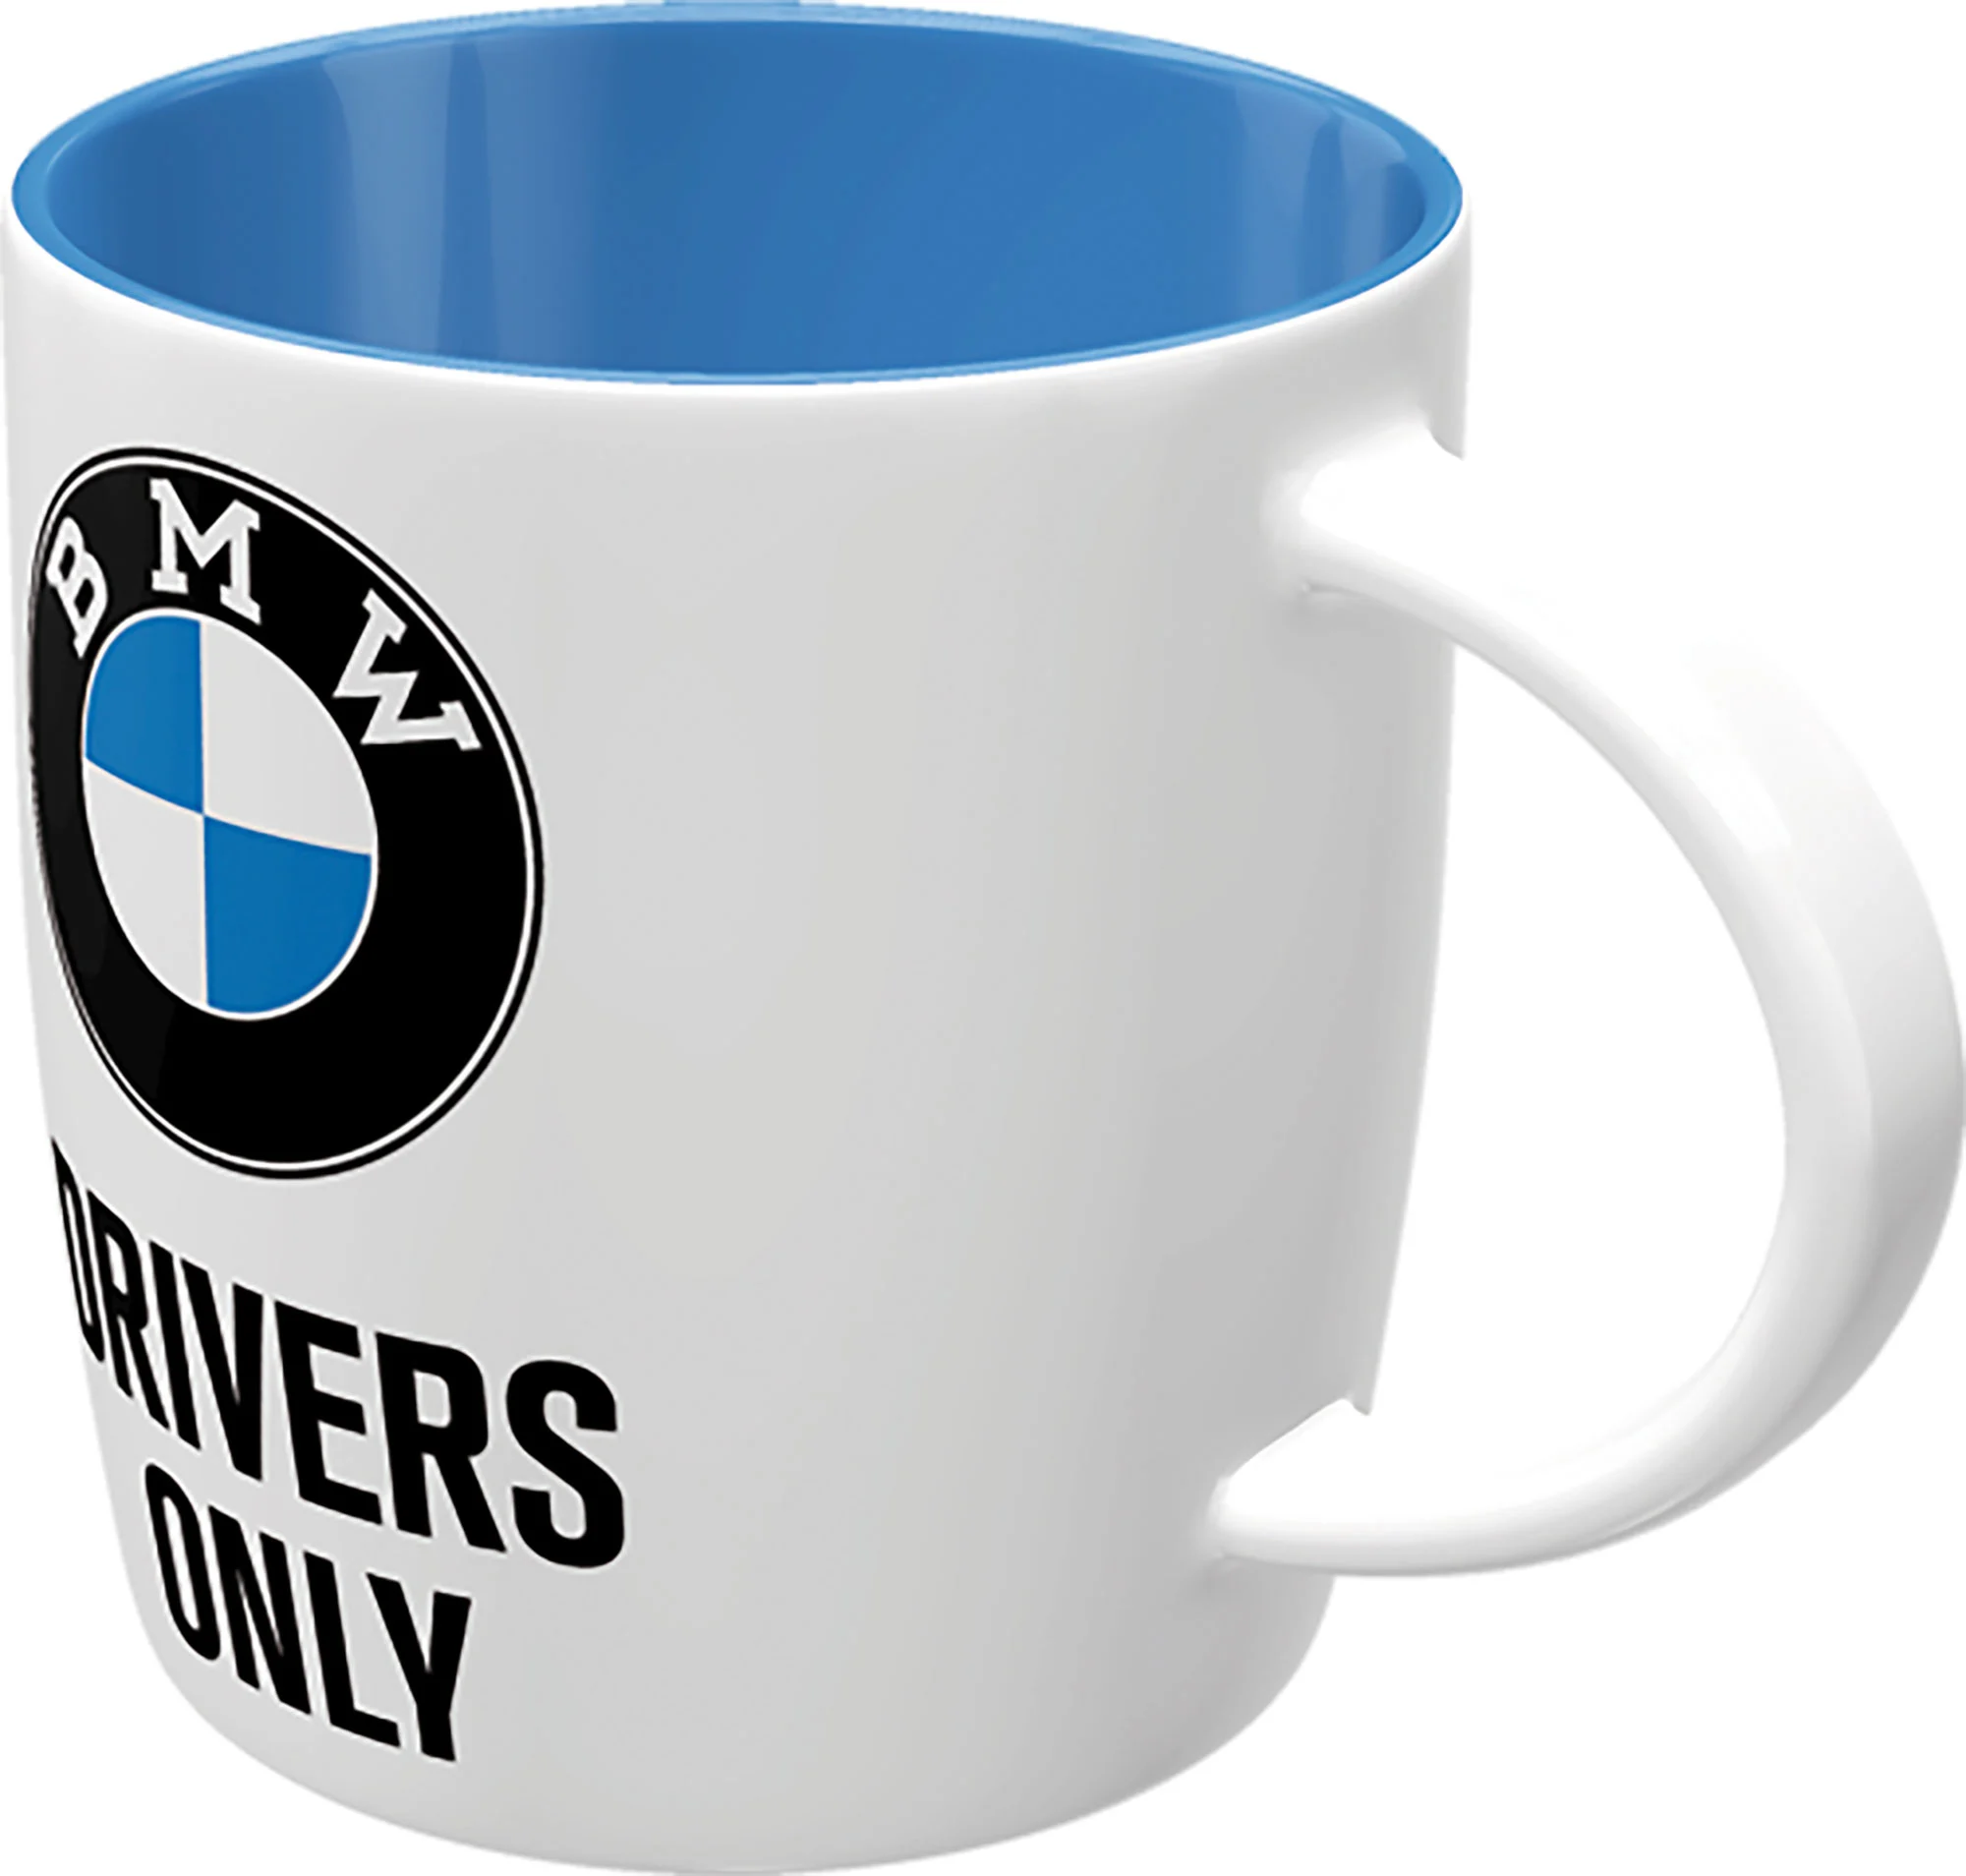 TAZZA *BMW DRIVERS ONLY*